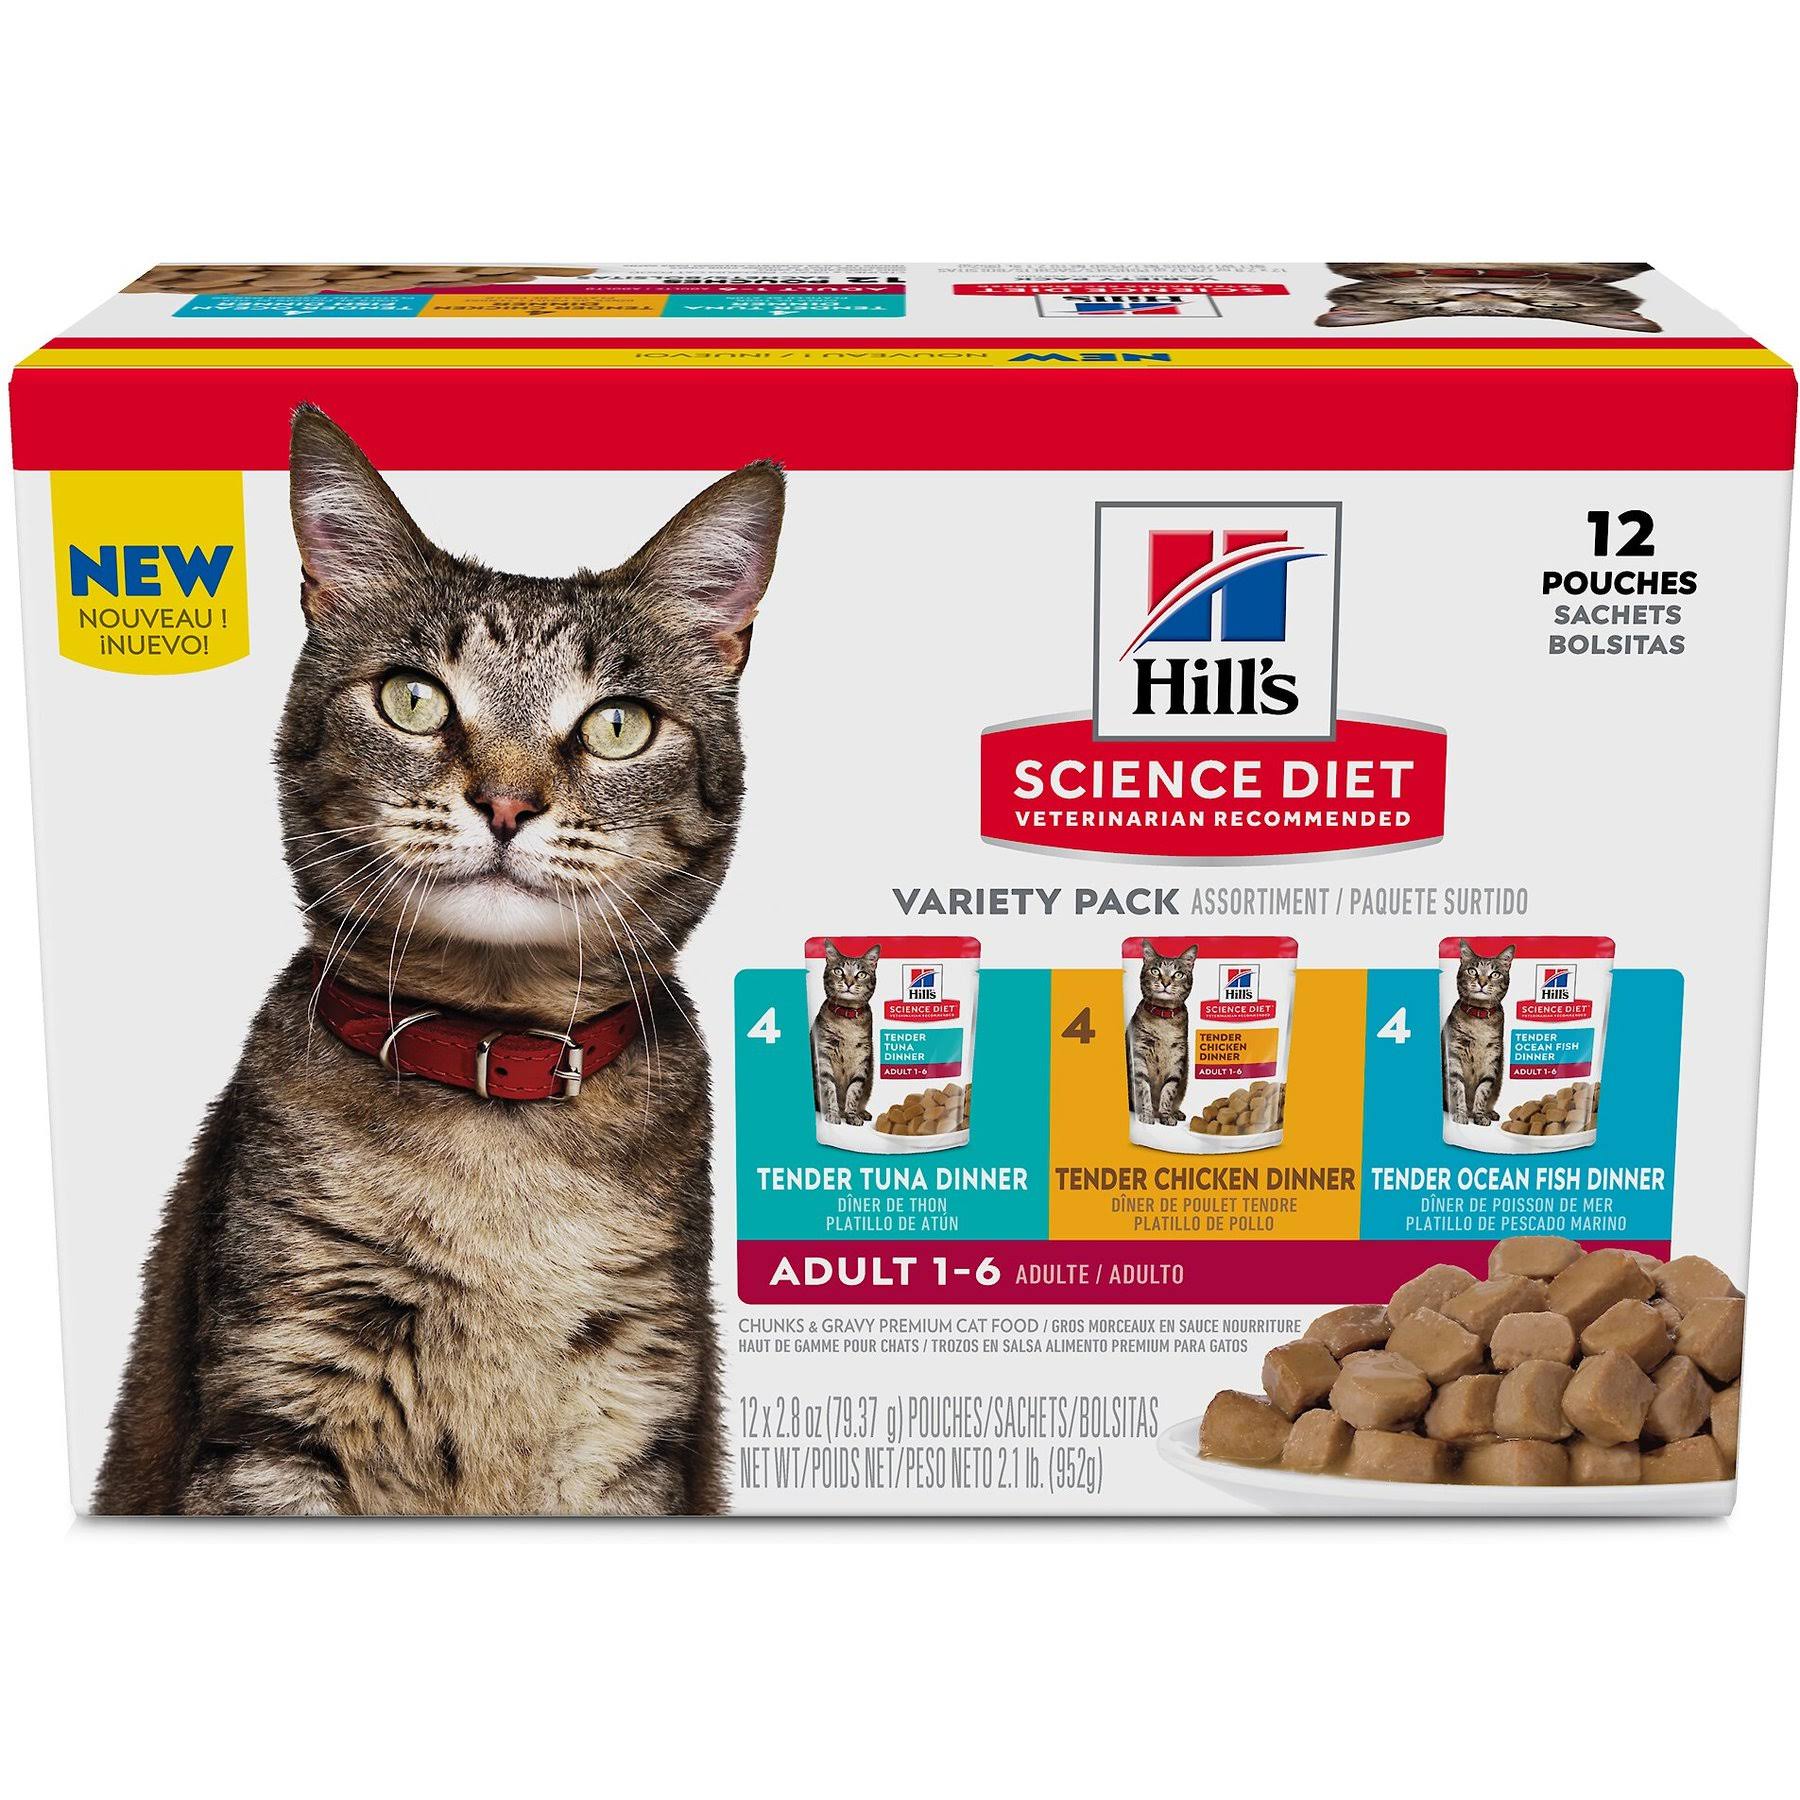 Hill's Science Diet Adult Tender Dinner Variety Pack Cat Food, 2.8-oz Pouch, Case of 12